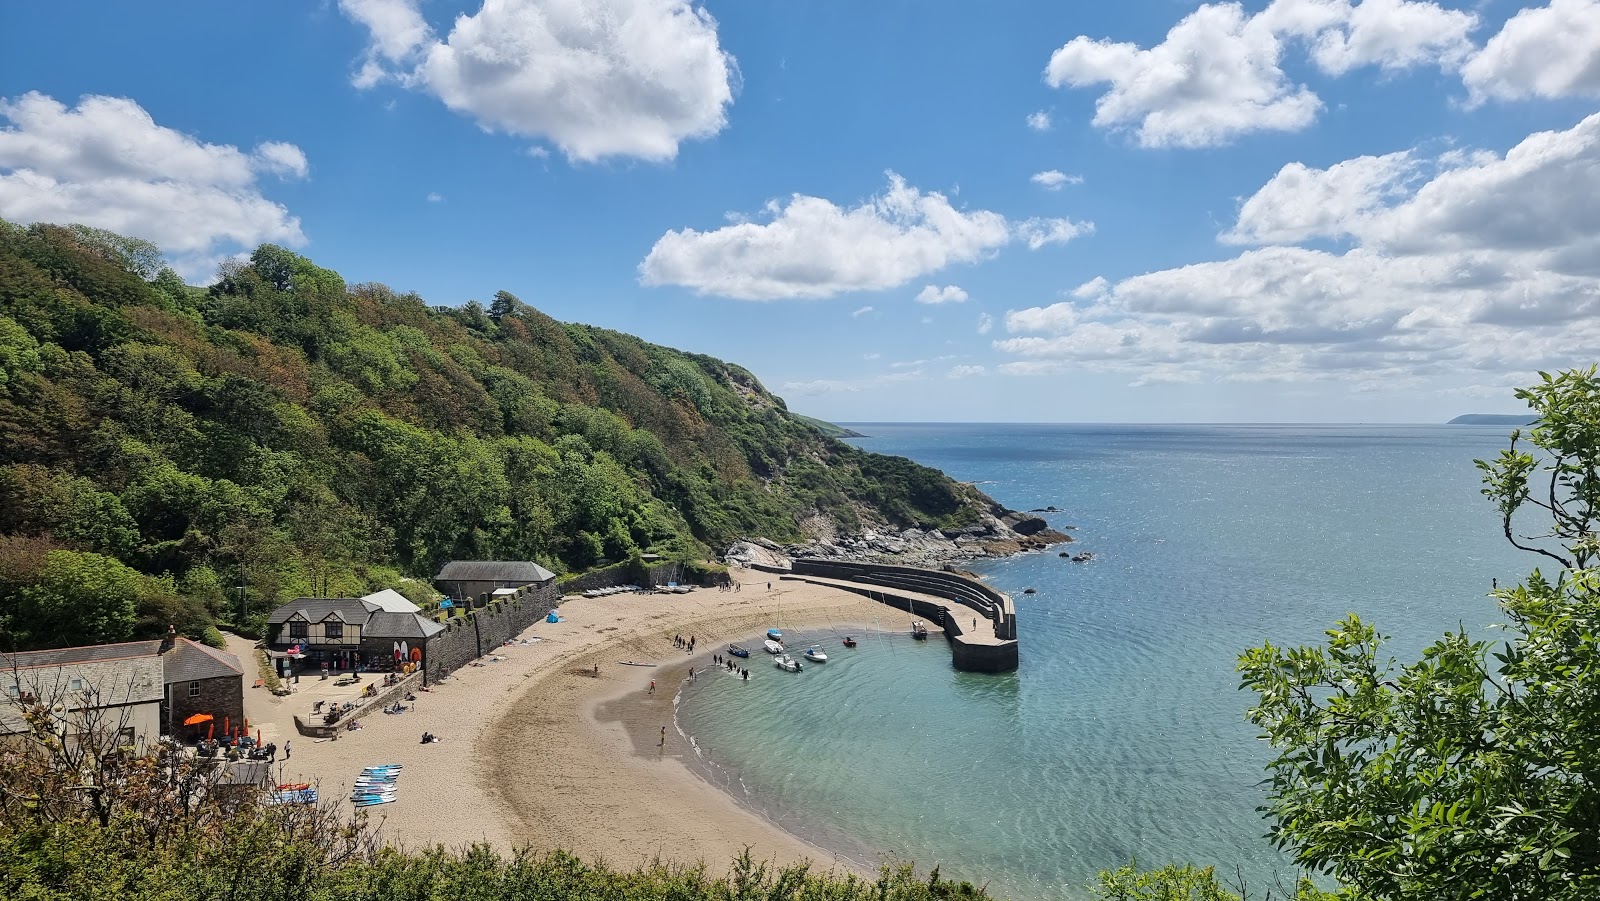 Photo of Polkerris beach and its beautiful scenery